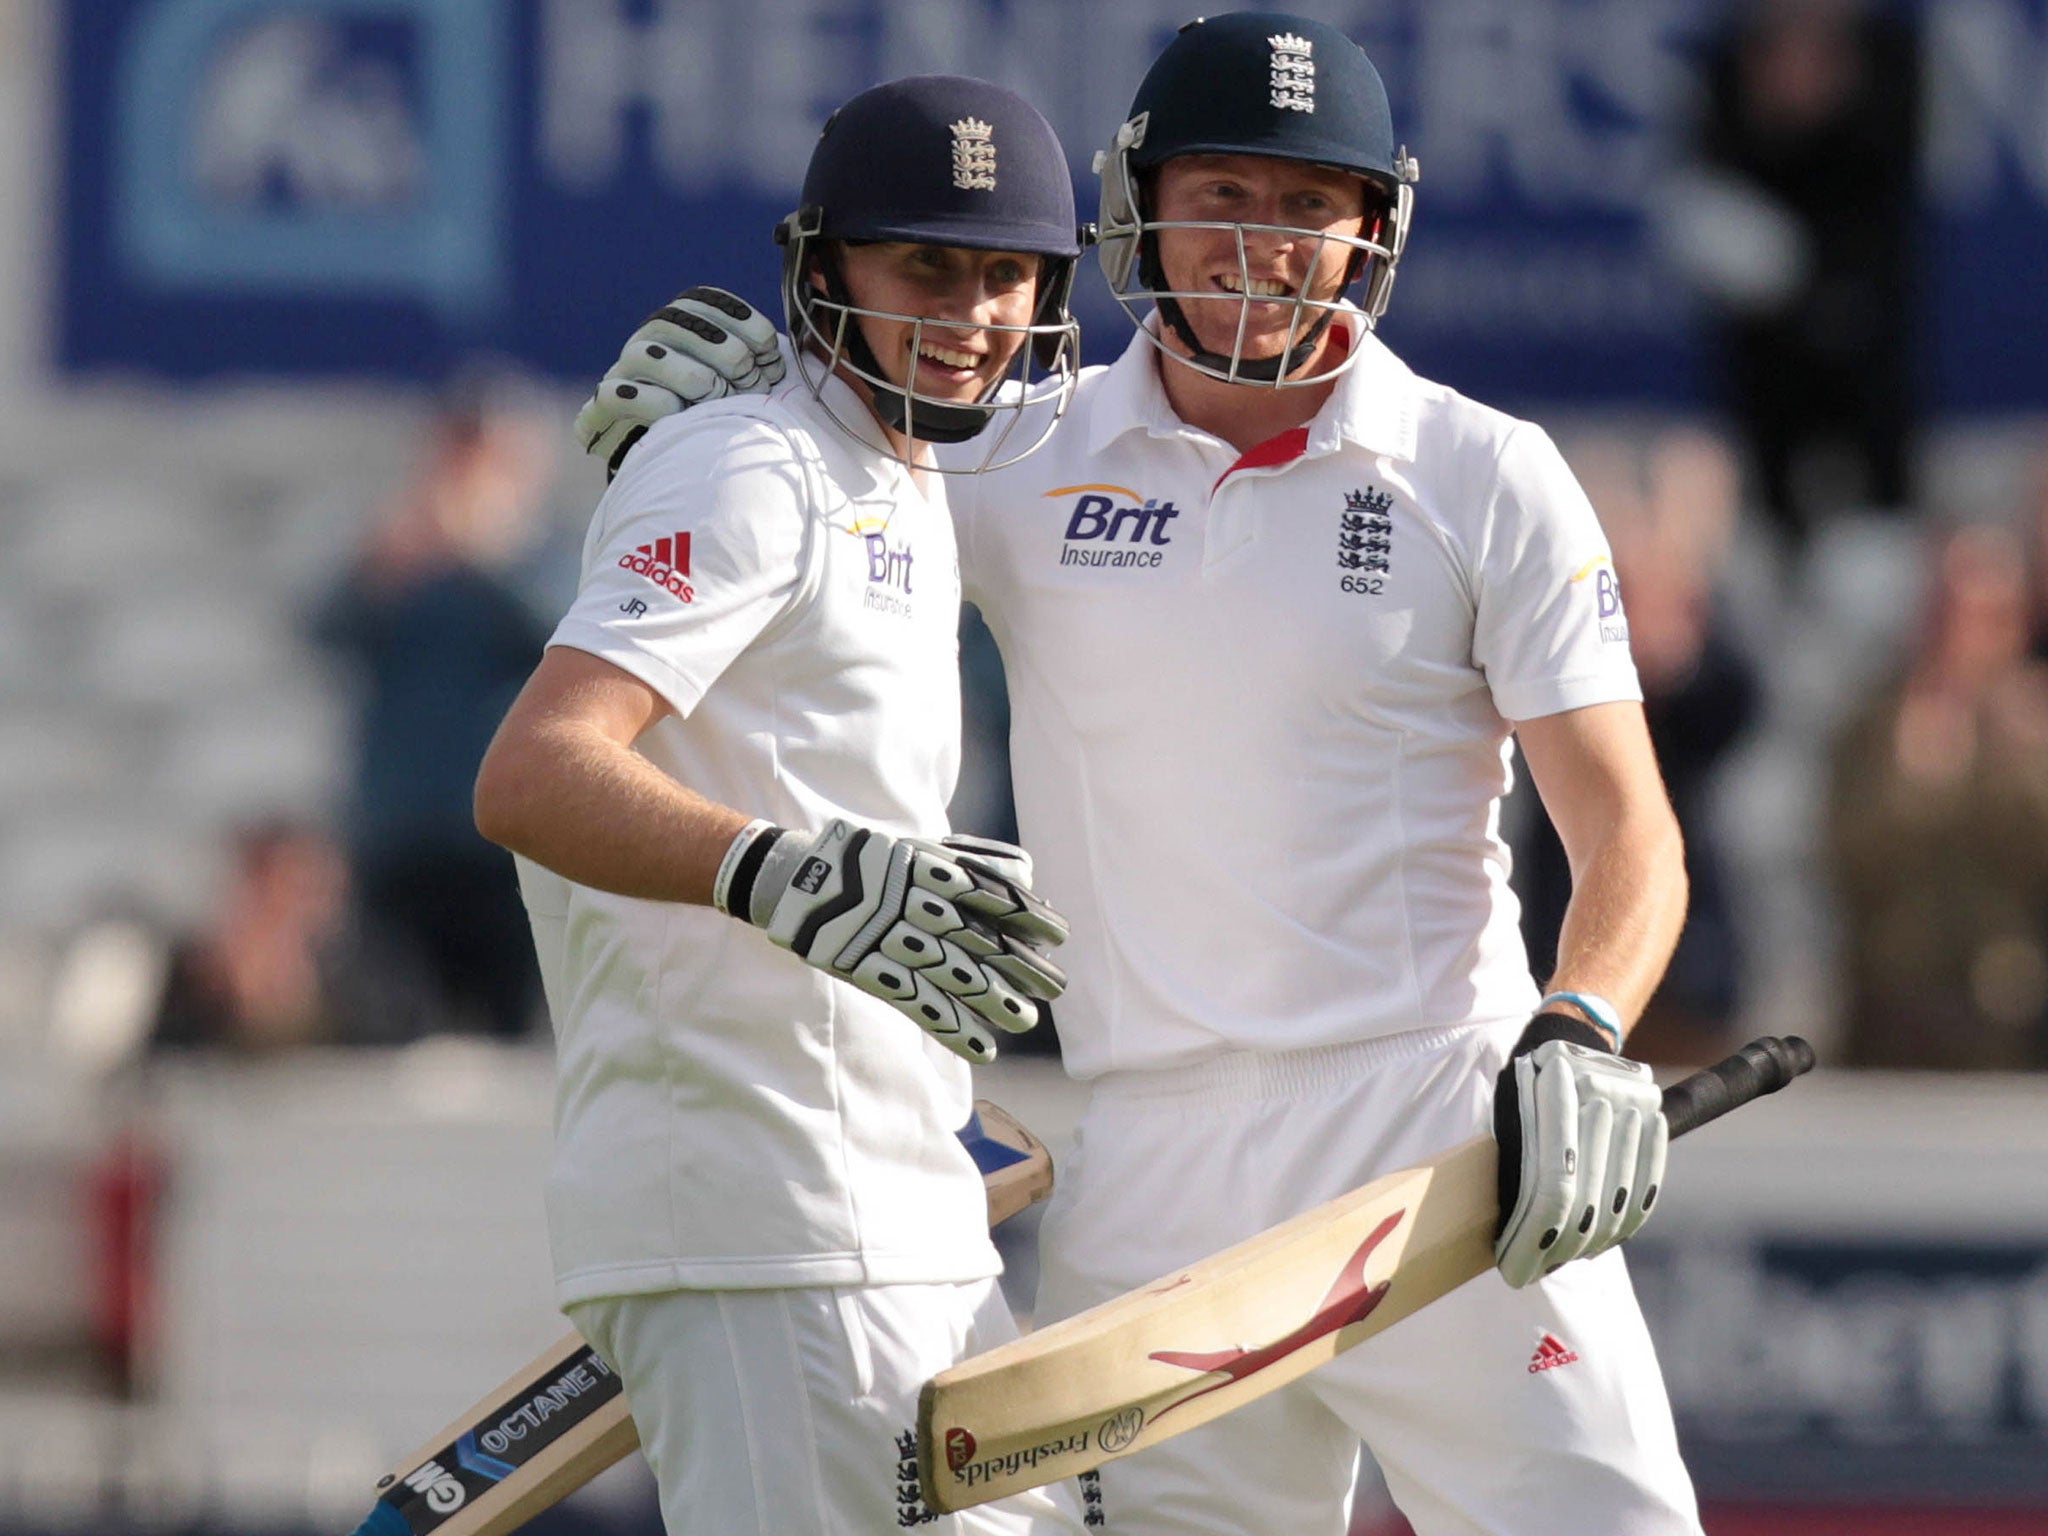 Pair of aces: Joe Root (left) is congratulated by Jonny Bairstow after hitting a four to bring up his maiden Test century against New Zealand yesterday